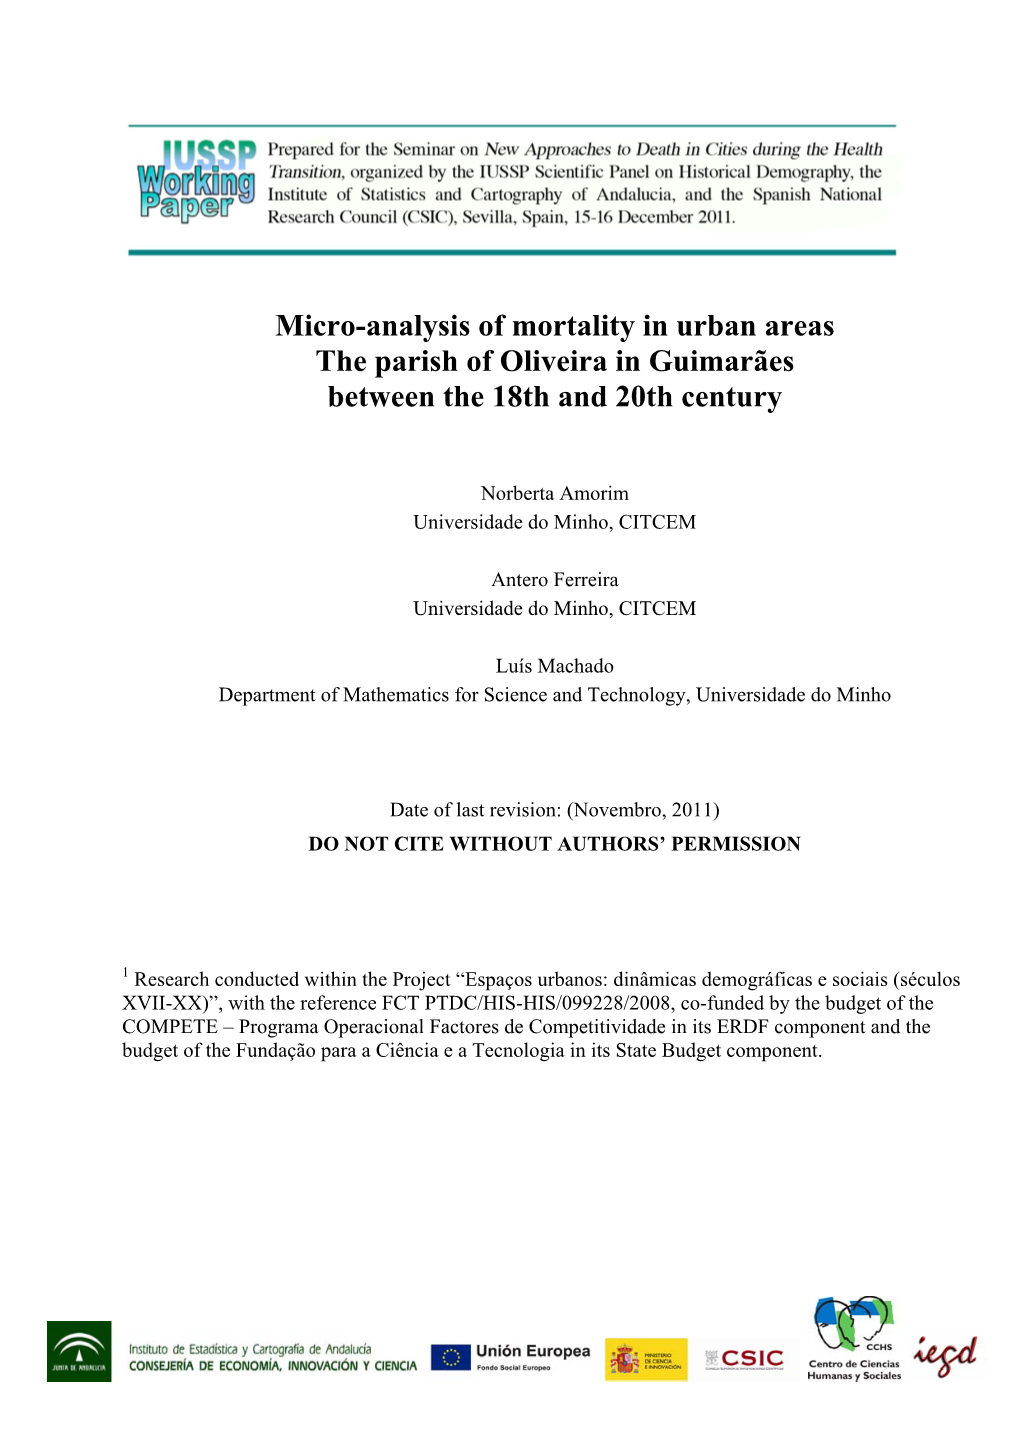 Micro-Analysis of Mortality in Urban Areas the Parish of Oliveira in Guimarães Between the 18Th and 20Th Century